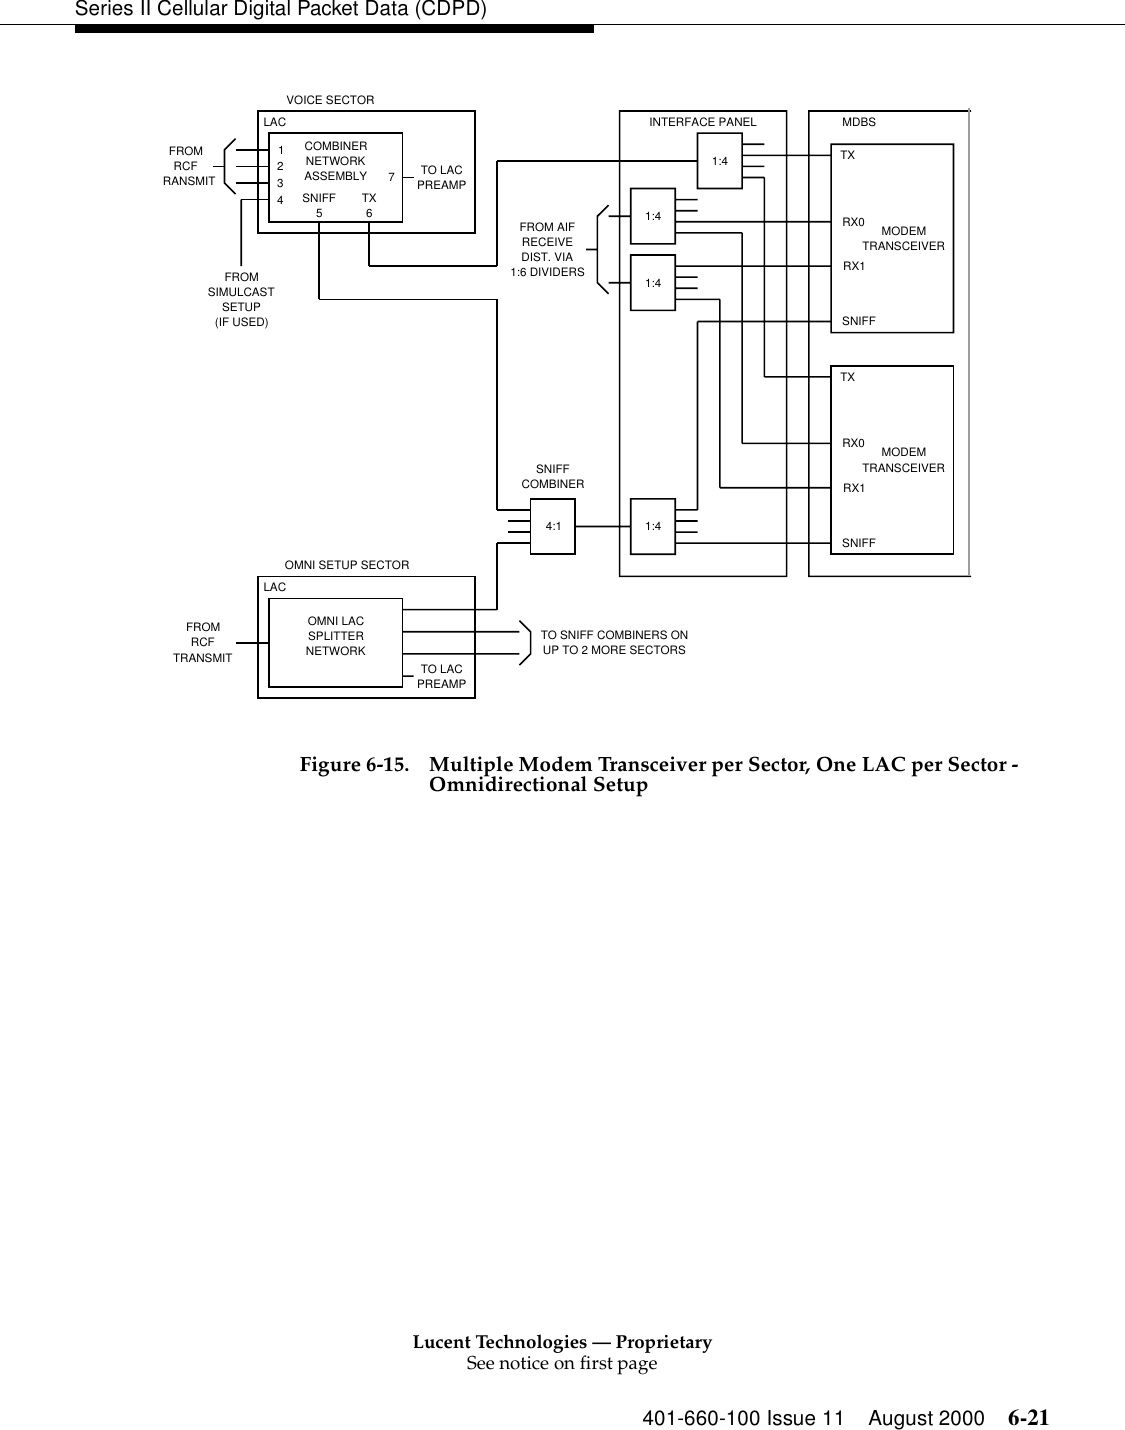 Lucent Technologies — ProprietarySee notice on first page401-660-100 Issue 11 August 2000 6-21Series II Cellular Digital Packet Data (CDPD)Figure 6-15. Multiple Modem Transceiver per Sector, One LAC per Sector - Omnidirectional SetupVOICE SECTORLAC123474:1INTERFACE PANEL MDBSTXRX0RX1SNIFFFROMRCFRANSMITCOMBINERNETWORKASSEMBLYSNIFF5TX6LACFROMRCFTRANSMITOMNI SETUP SECTORTO LACPREAMPTO LACPREAMPTO SNIFF COMBINERS ONUP TO 2 MORE SECTORSFROM AIFRECEIVEDIST. VIA1:6 DIVIDERSMODEMTRANSCEIVERTXRX0RX1SNIFFMODEMTRANSCEIVER1:41:41:41:4SNIFFCOMBINERFROMSIMULCASTSETUP(IF USED)OMNI LACSPLITTERNETWORK